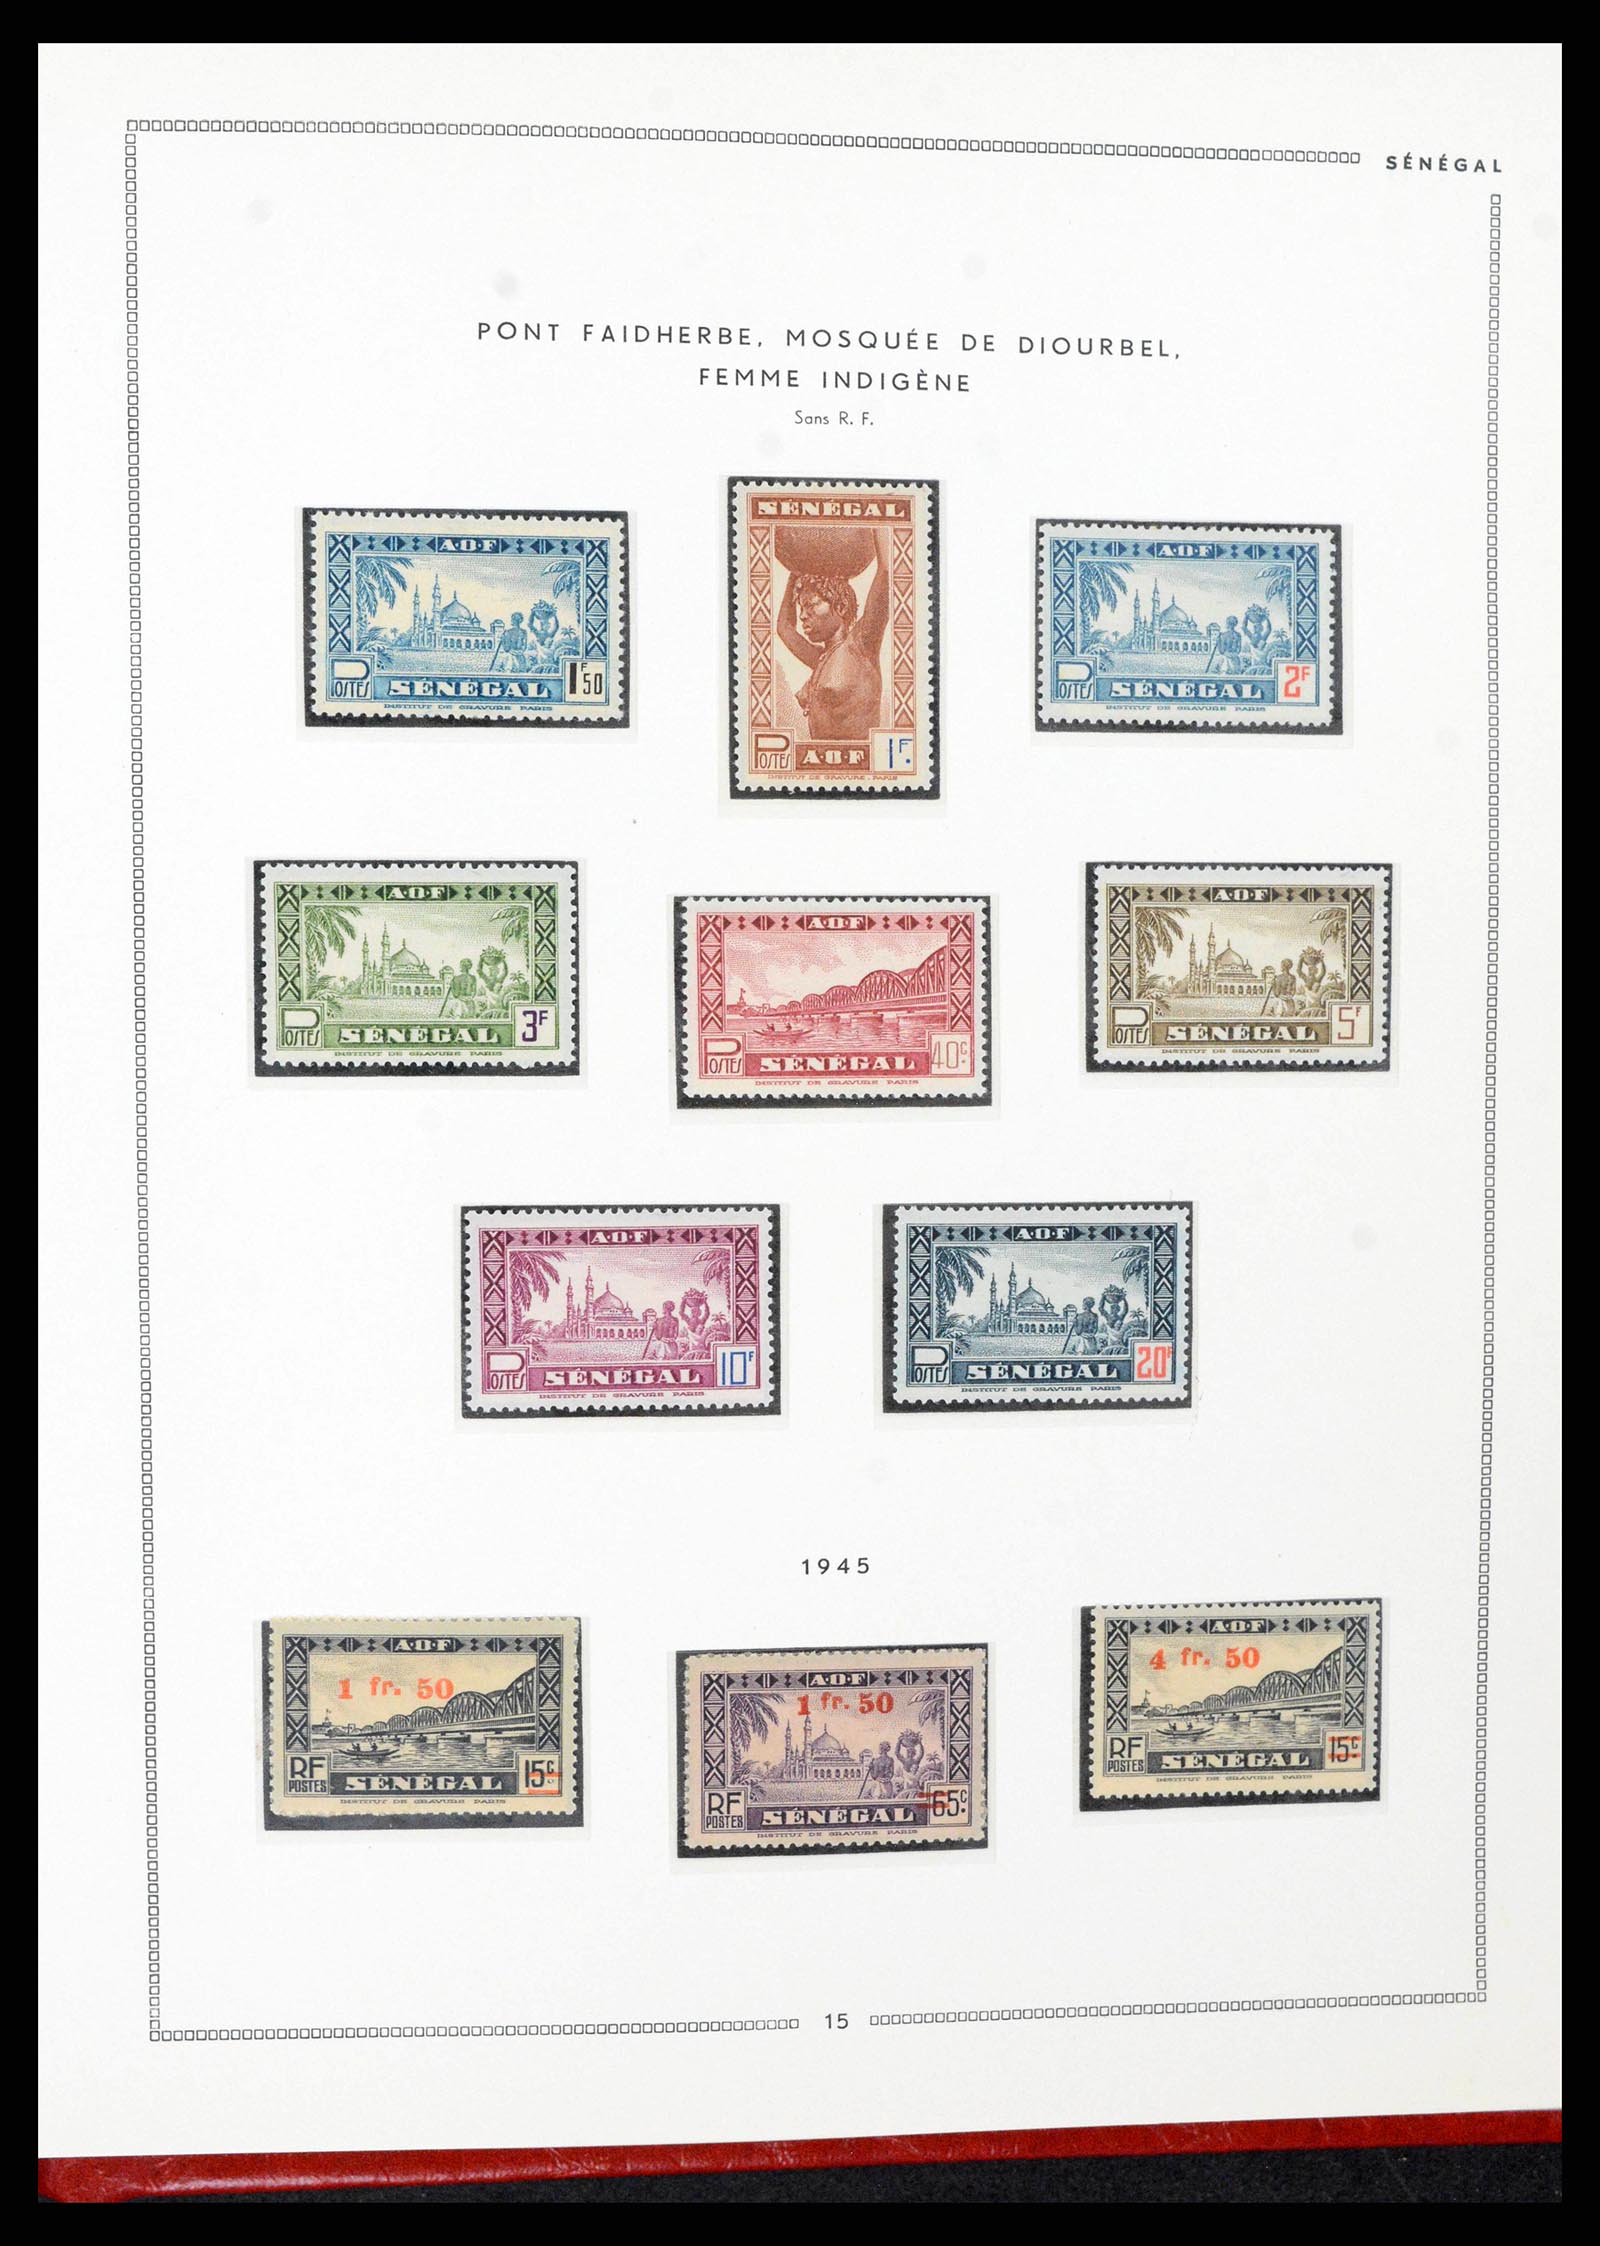 38385 0072 - Stamp collection 38385 French Colonies supercollection 1859-1975.